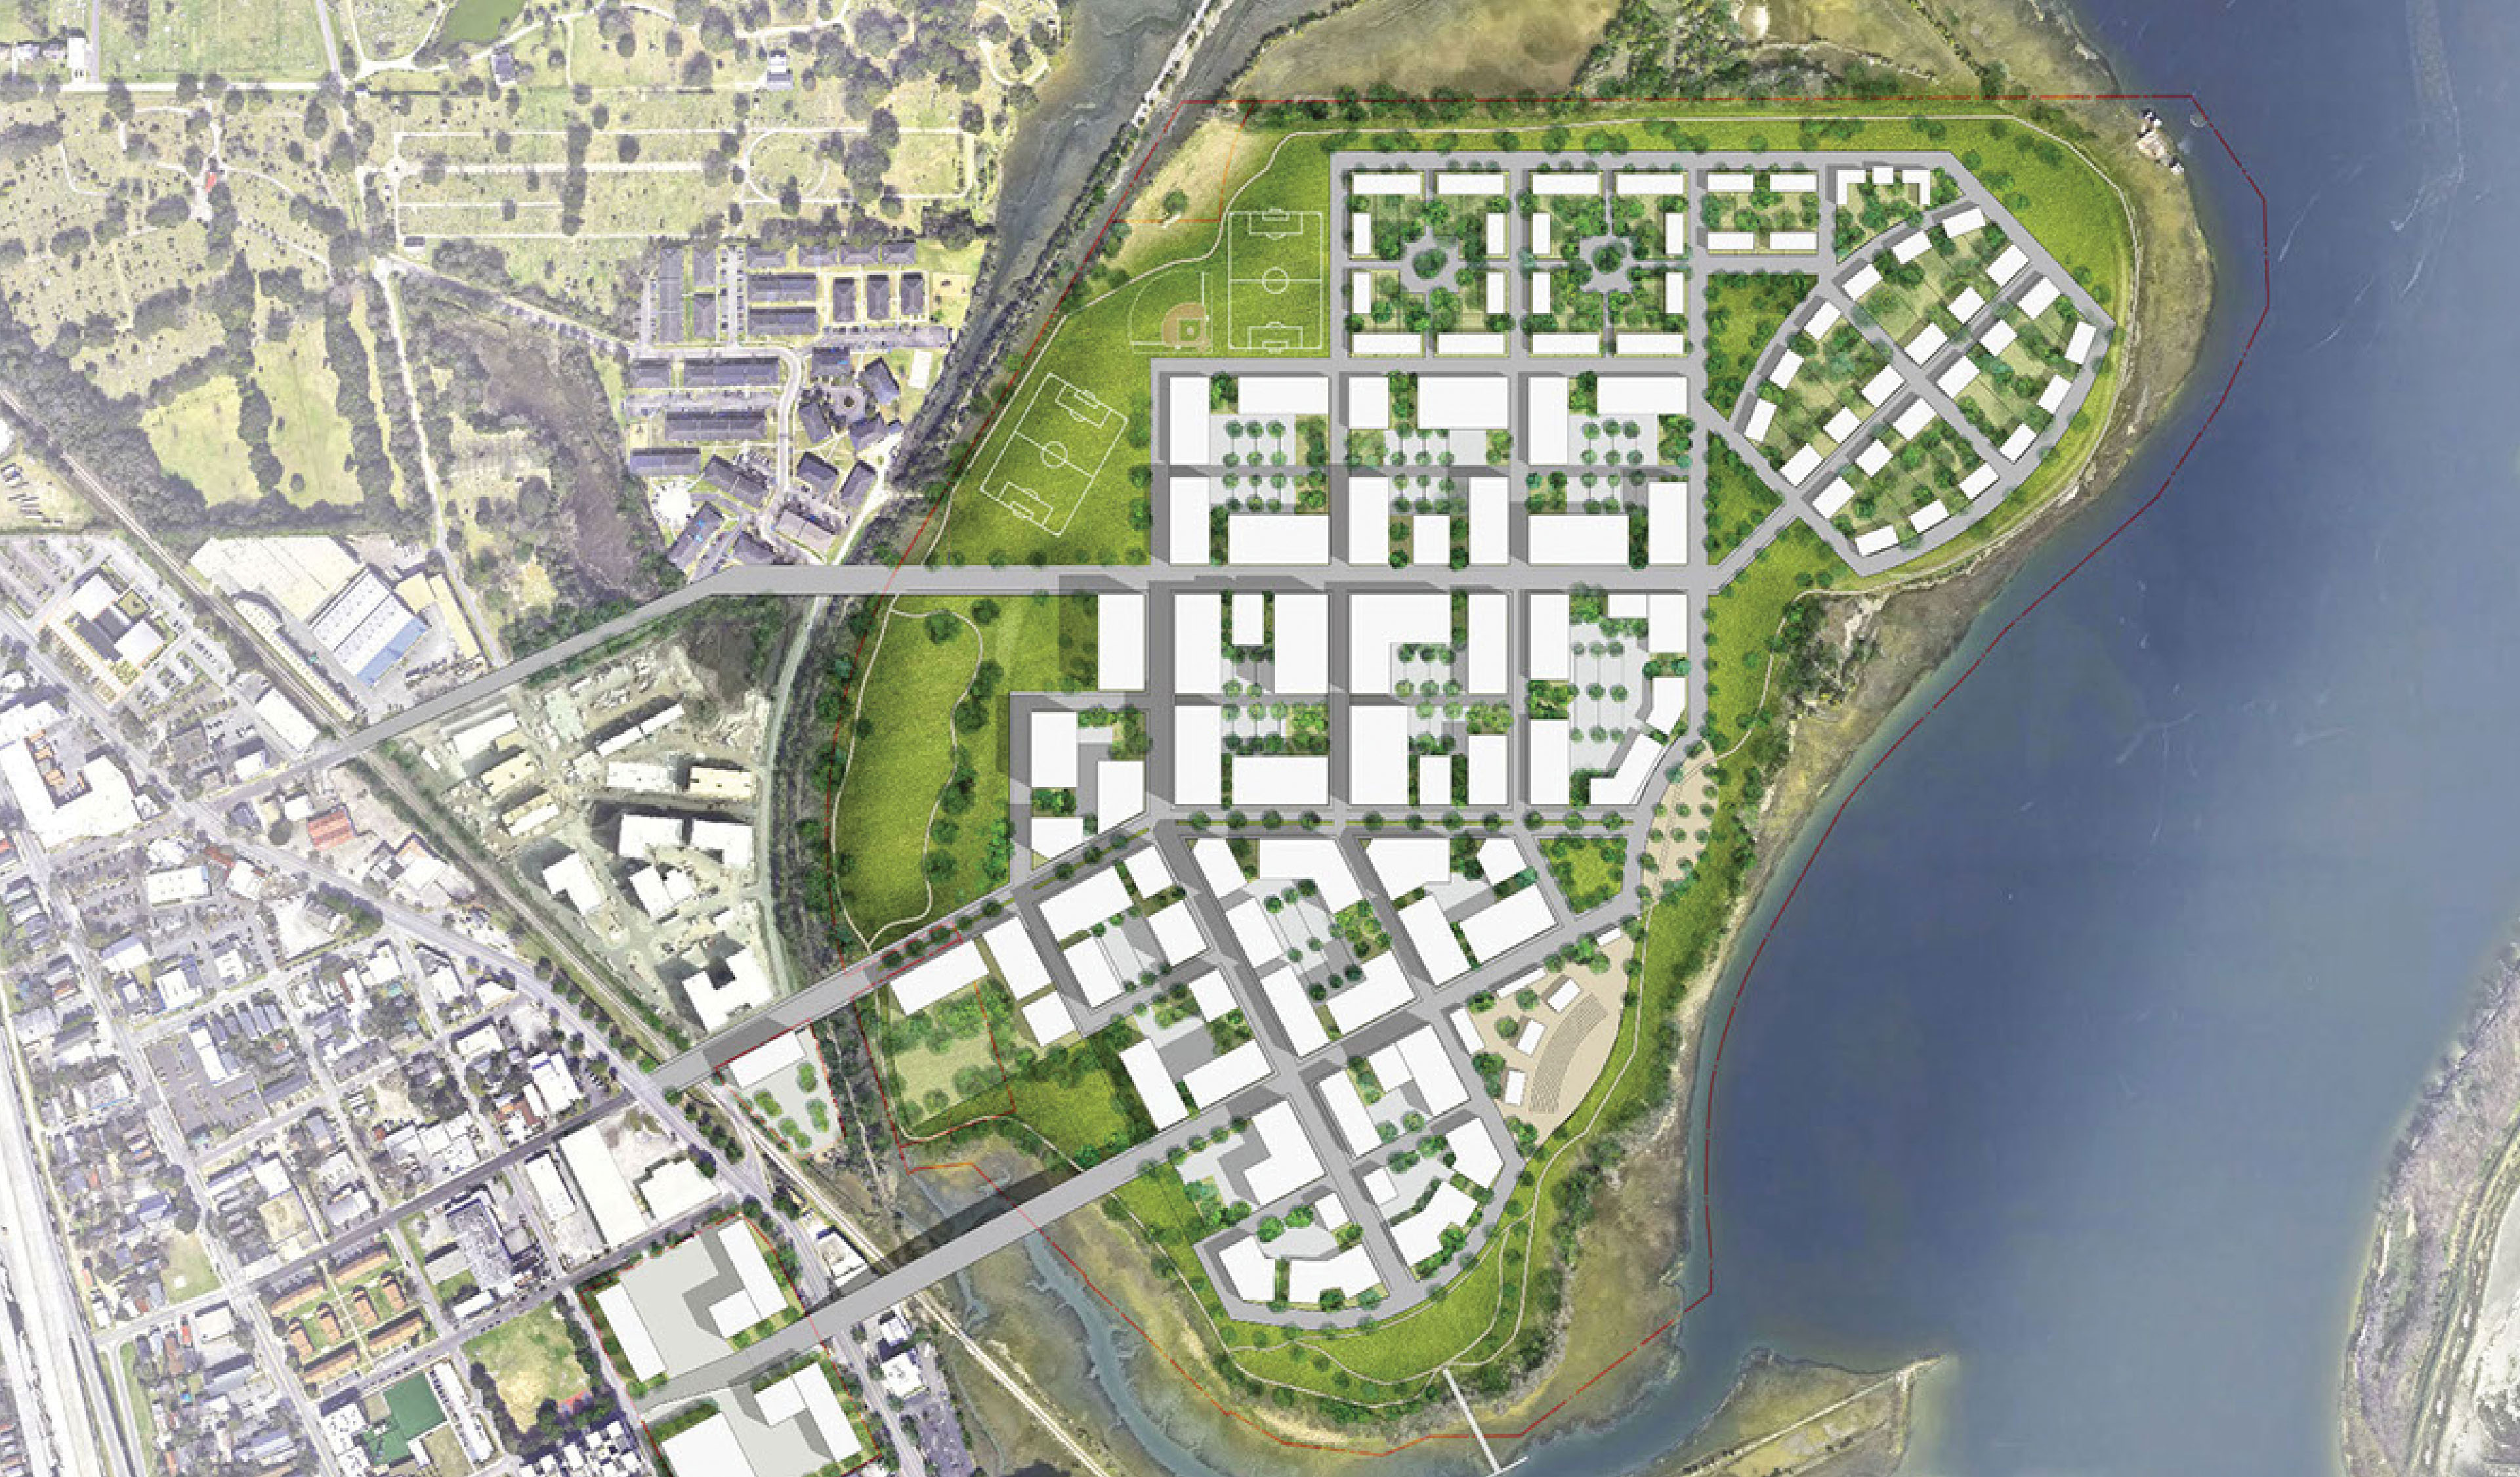 Plans for Laurel Island approved in 2020 include a mix of residential, retail, hospitality, and office space, as well as public parks, an outdoor concert venue, and access to the harbor.